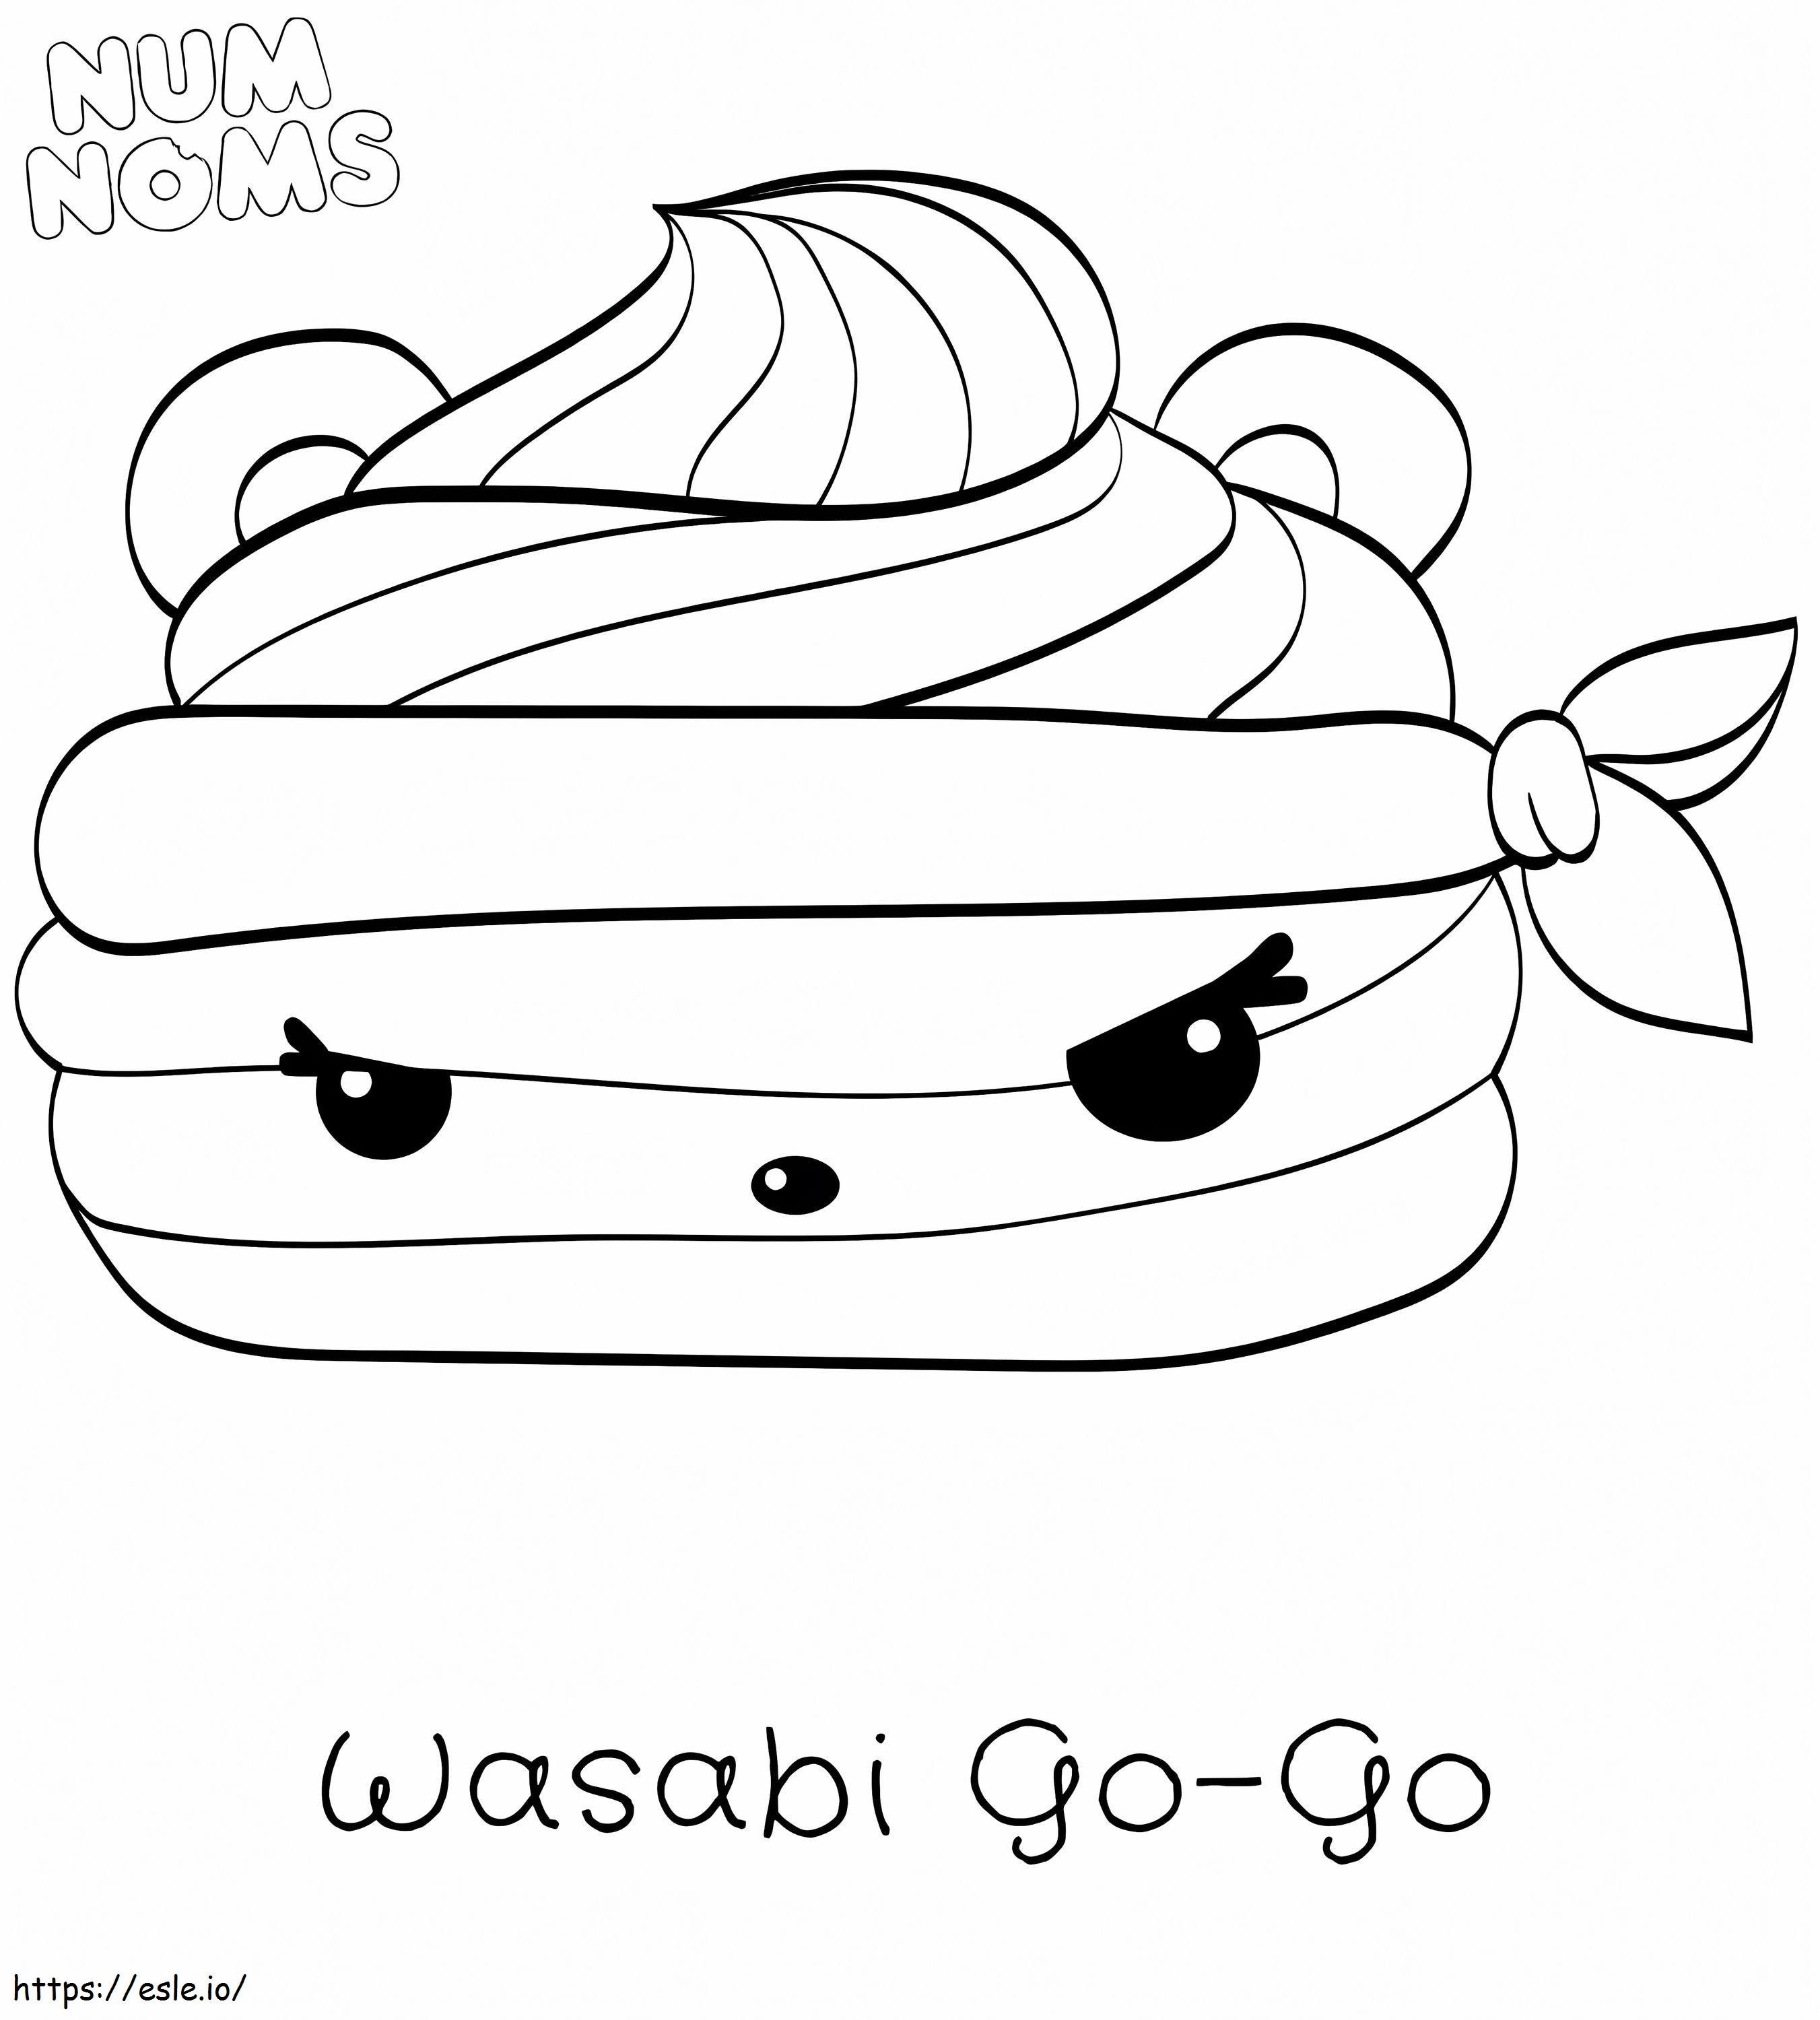 Fresco Wasabi Go Go And Num Noms coloring page